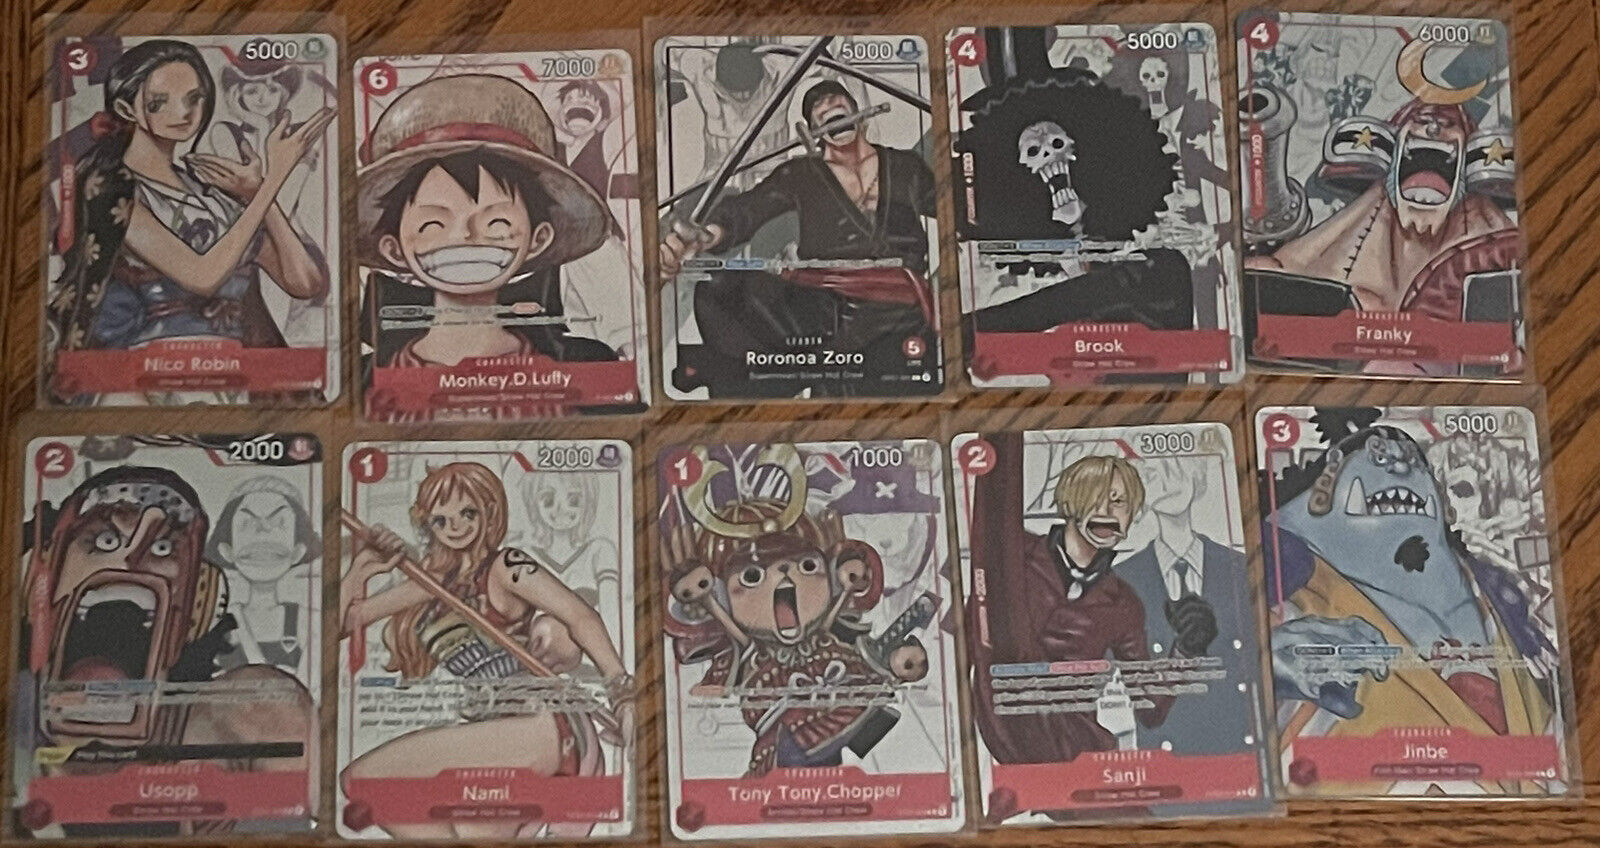 One Piece 25th Anniversary Premium Card Collection Full Set English Cards Nami